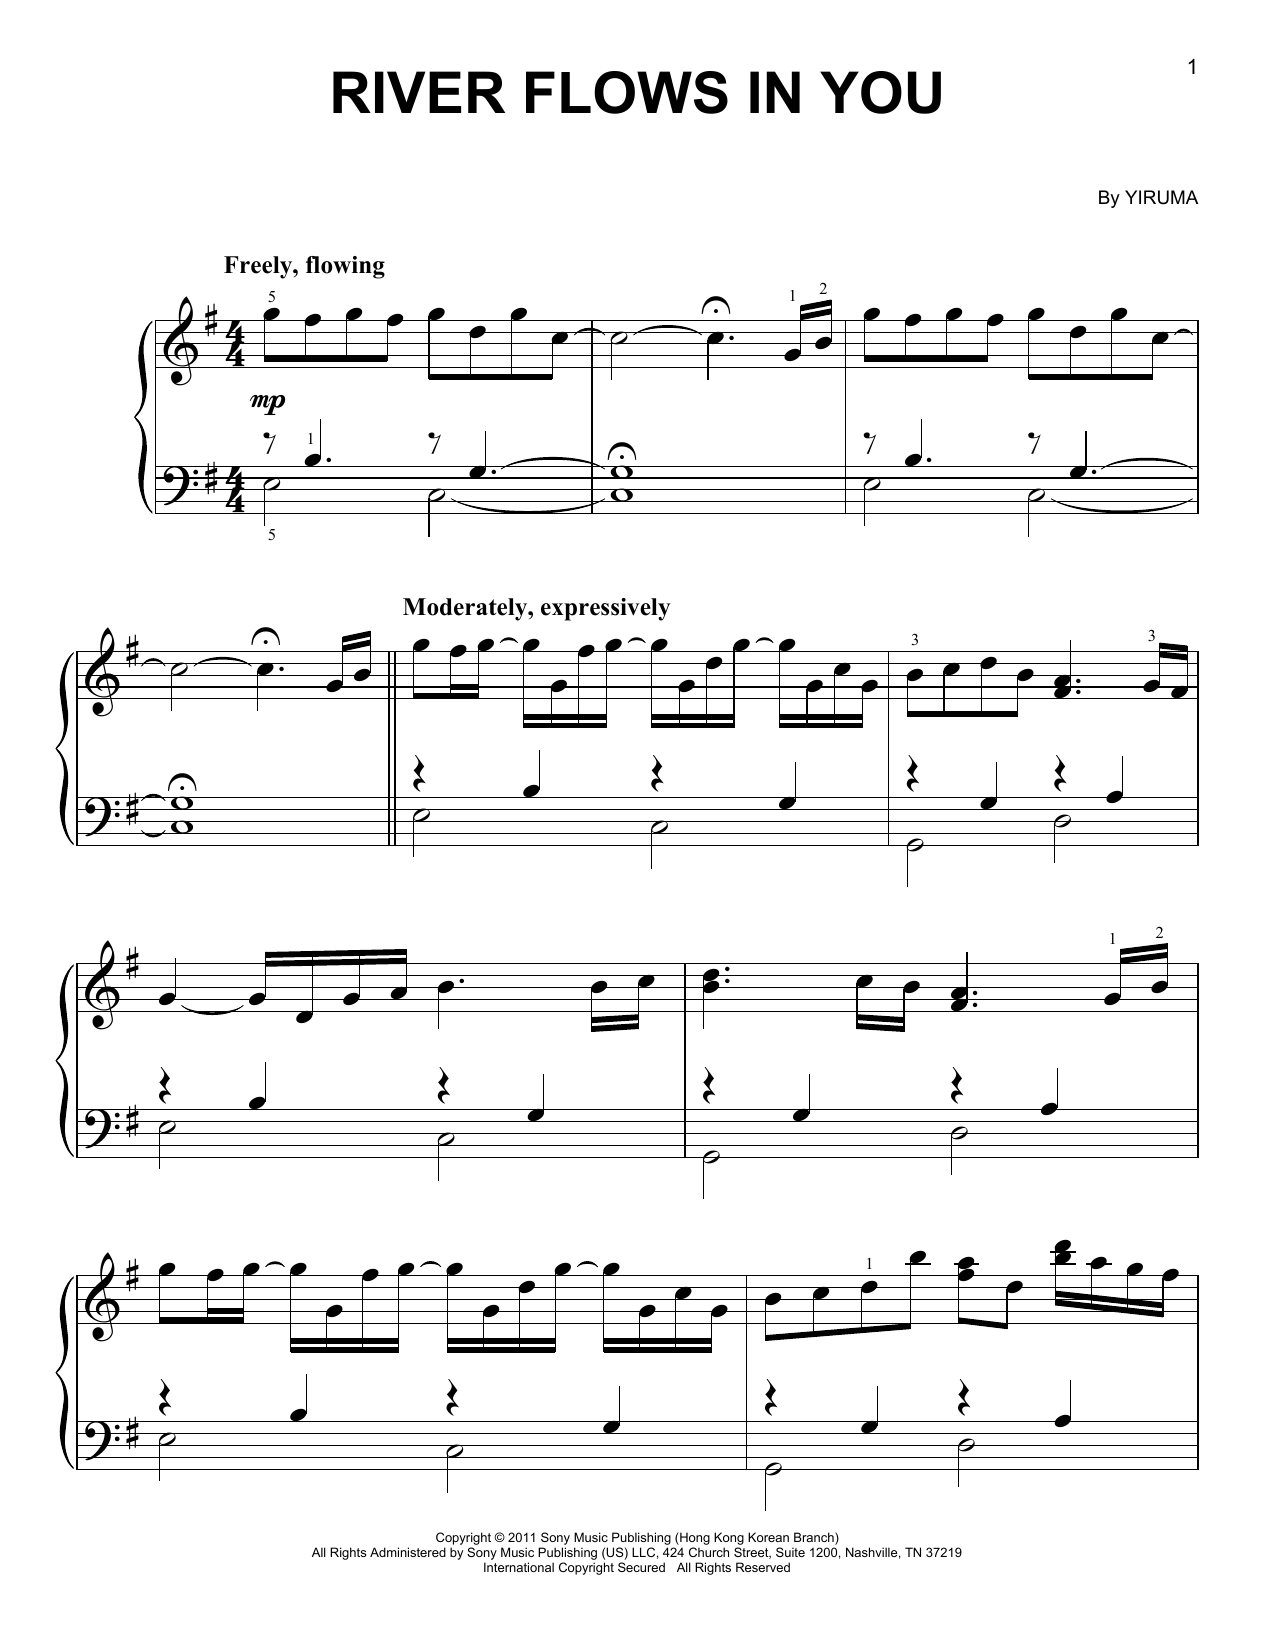 Yiruma River Flows In You sheet music notes and chords. Download Printable PDF.